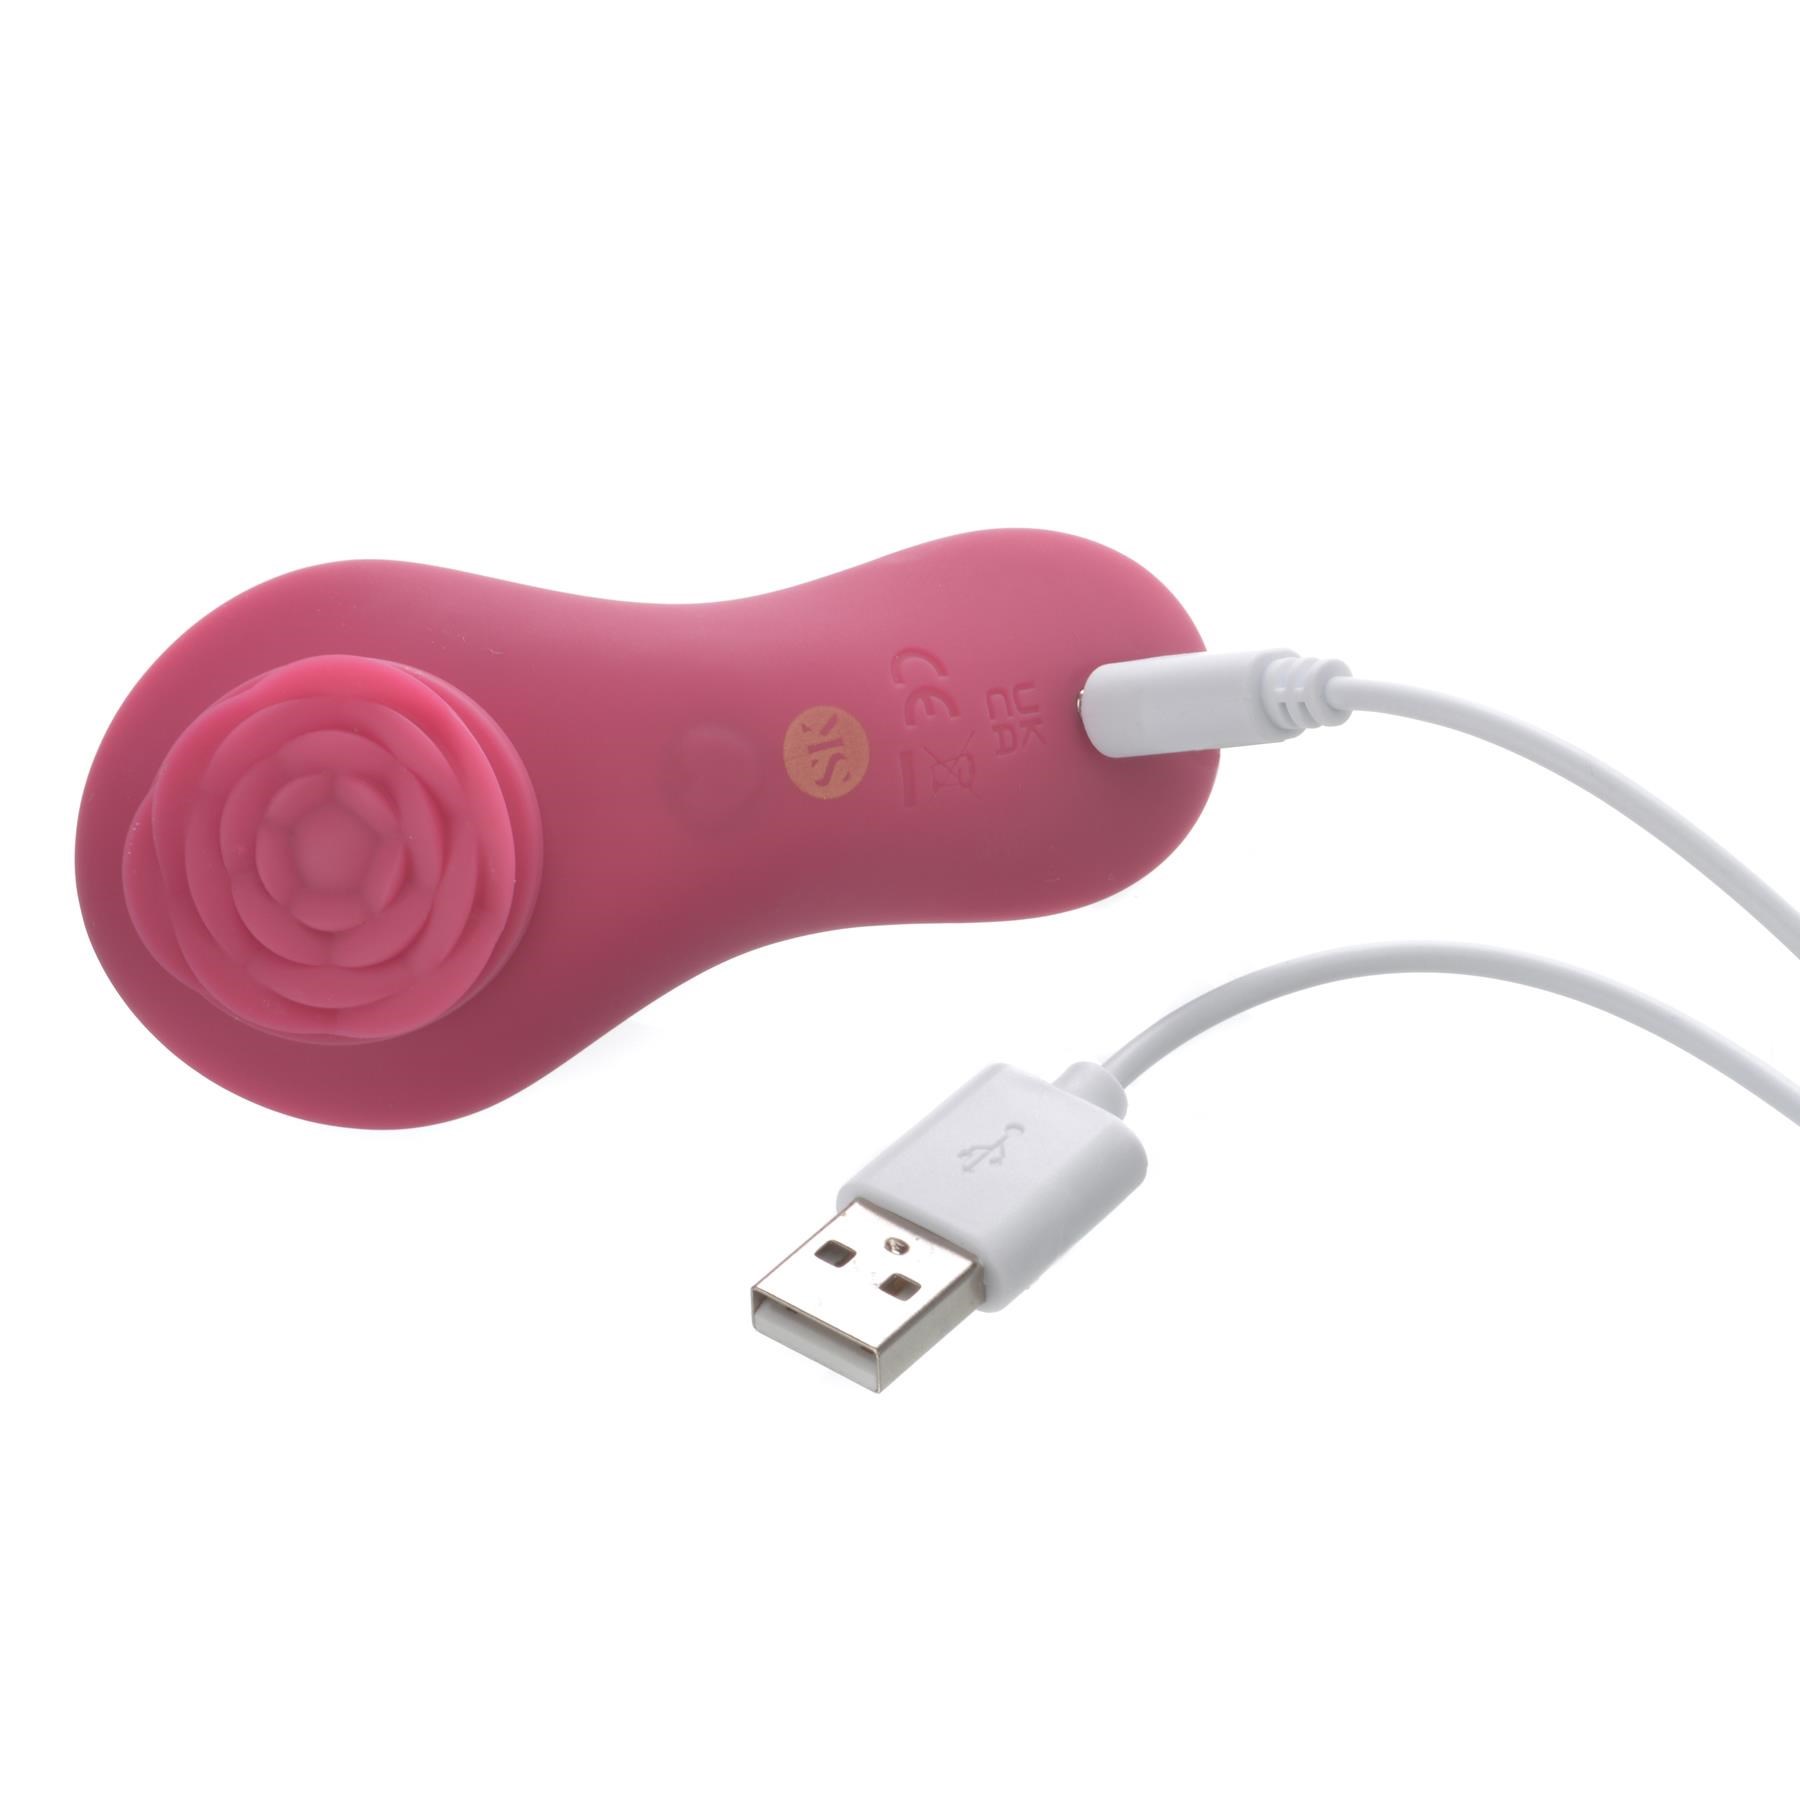 Rosegasm Rose Surprise Remote Control Panty Vibrator- Showing Where Charging Cable is Placed